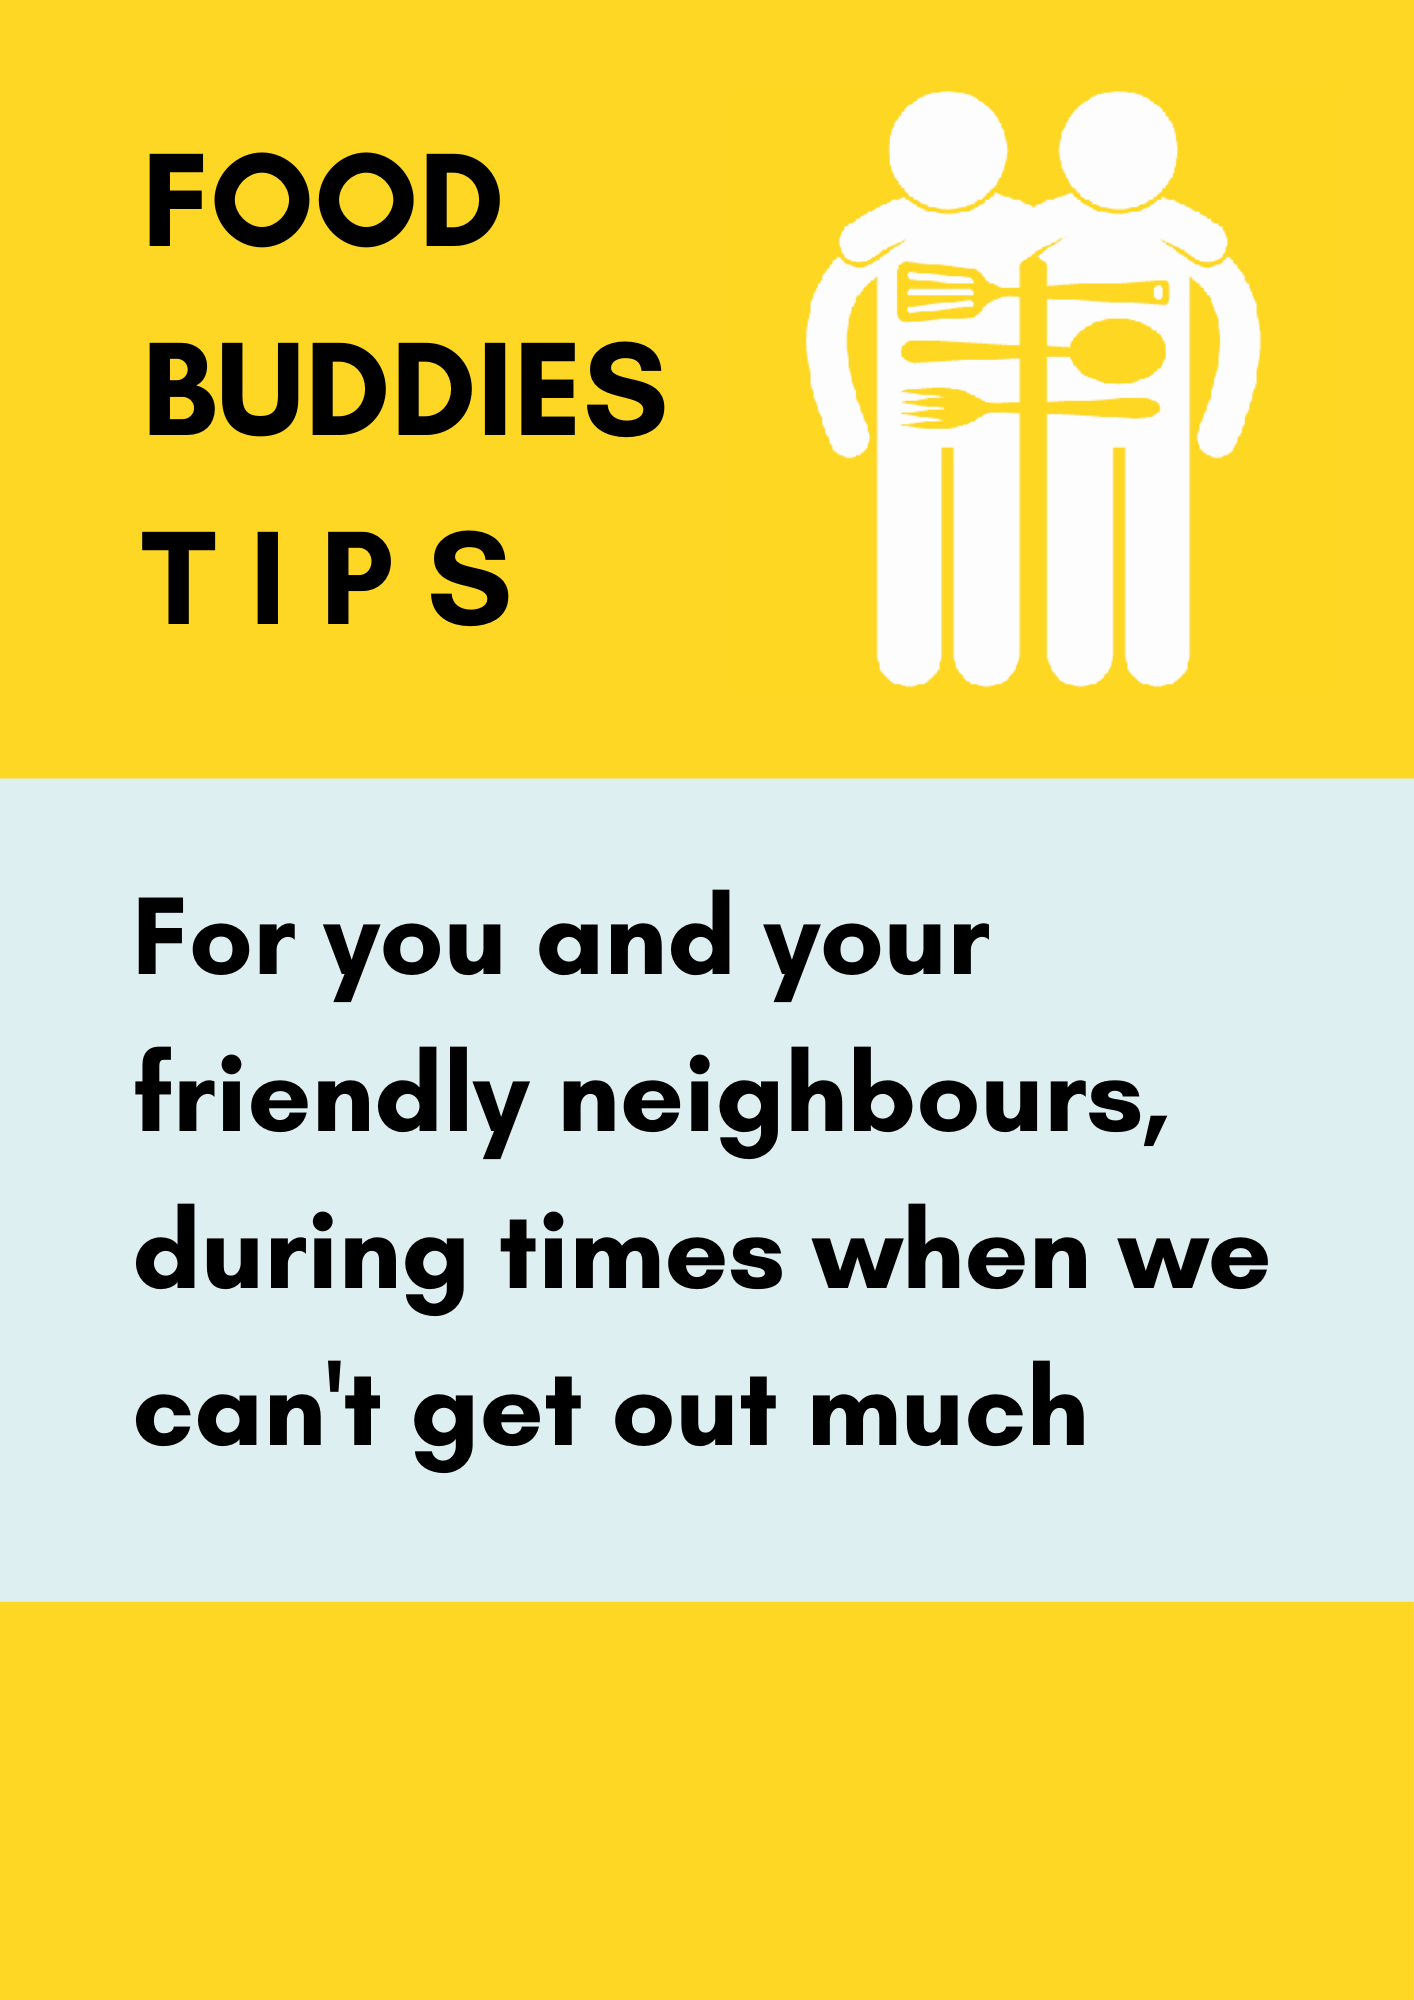 Food Buddies Tips for you and your friendly neighbours during times when we can't get out much